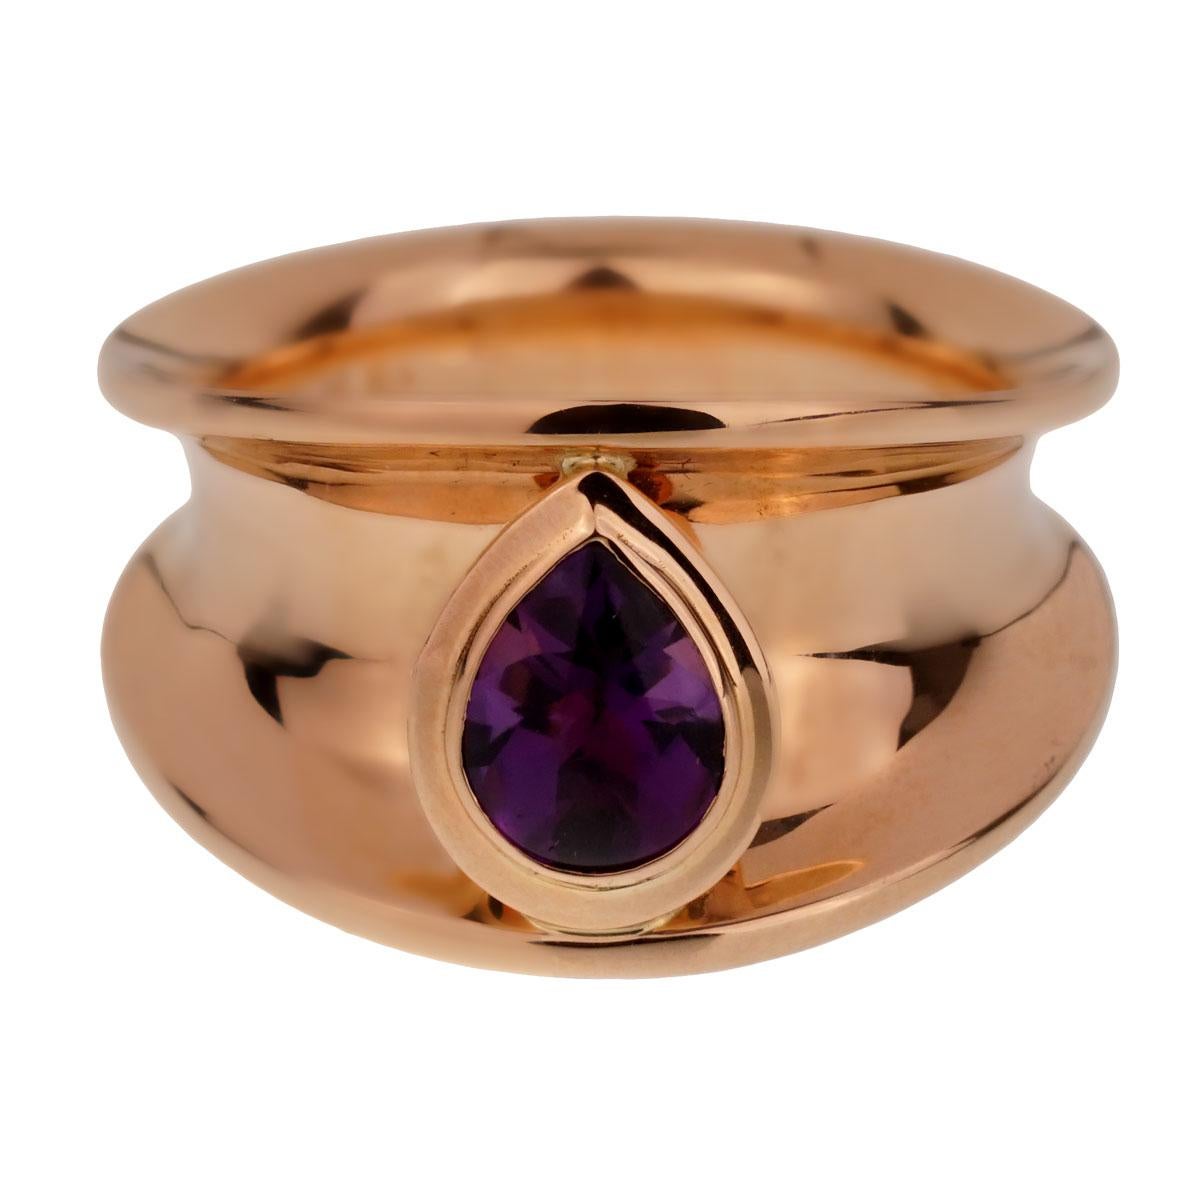 A fabulous Chopard rose gold ring showcasing a 1.06ct pear shaped amethyst in 18k gold. Size 7 and can be resized.